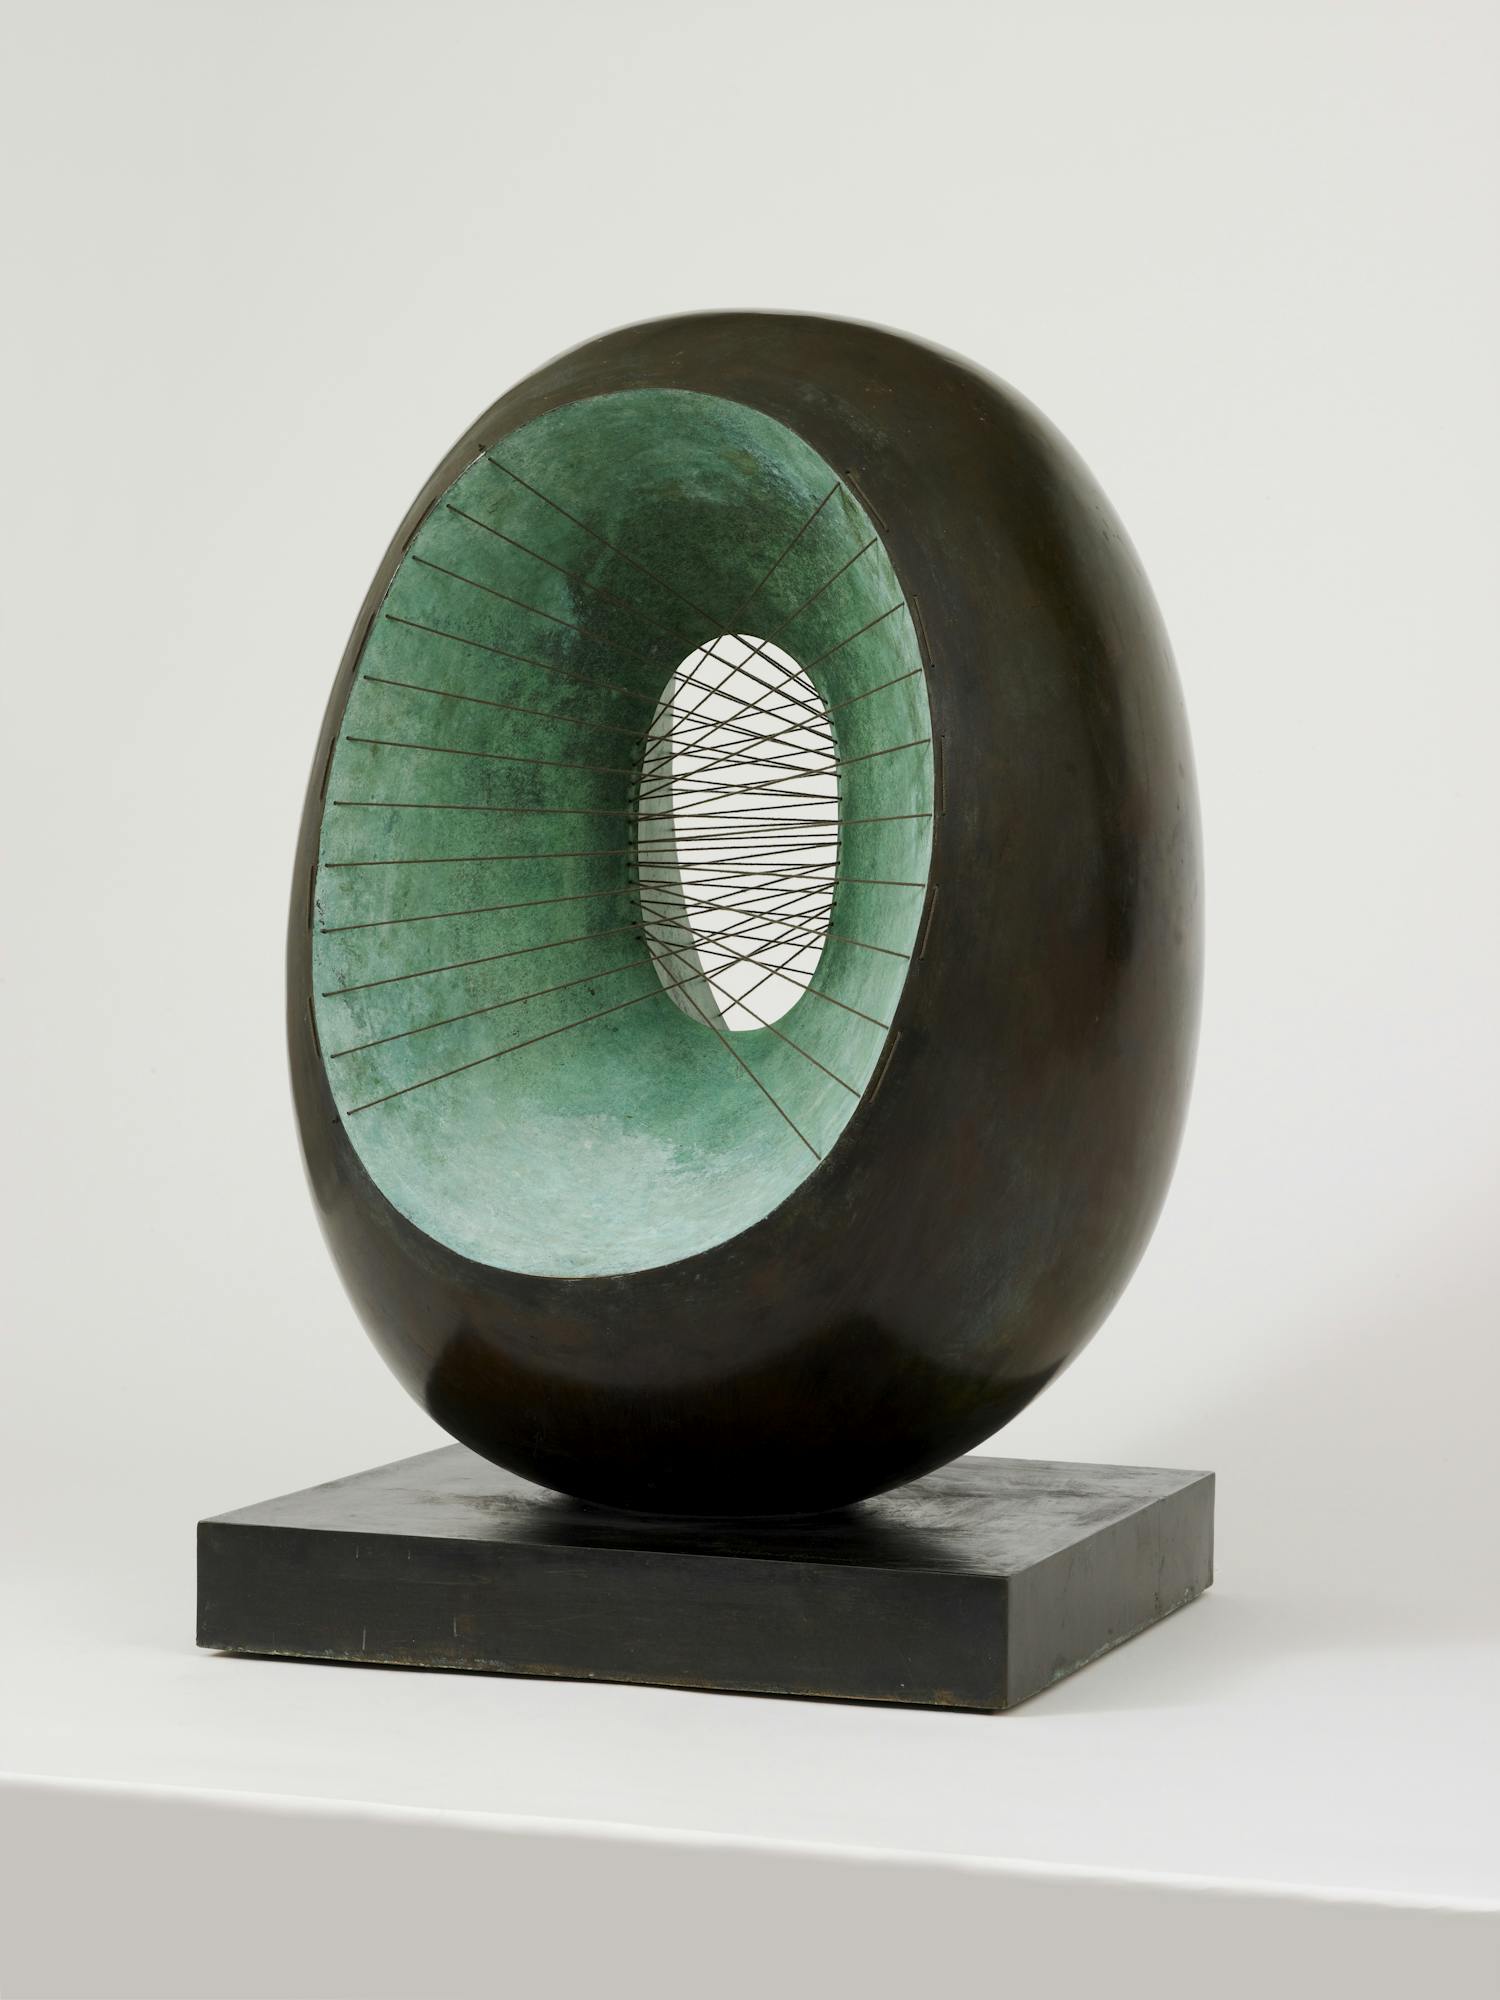 [ID: The image shows an oval shaped black sculpture with an oval opening, revealing its green interior. A series of strings are stretched from left to right and through the sculpture. End of ID]